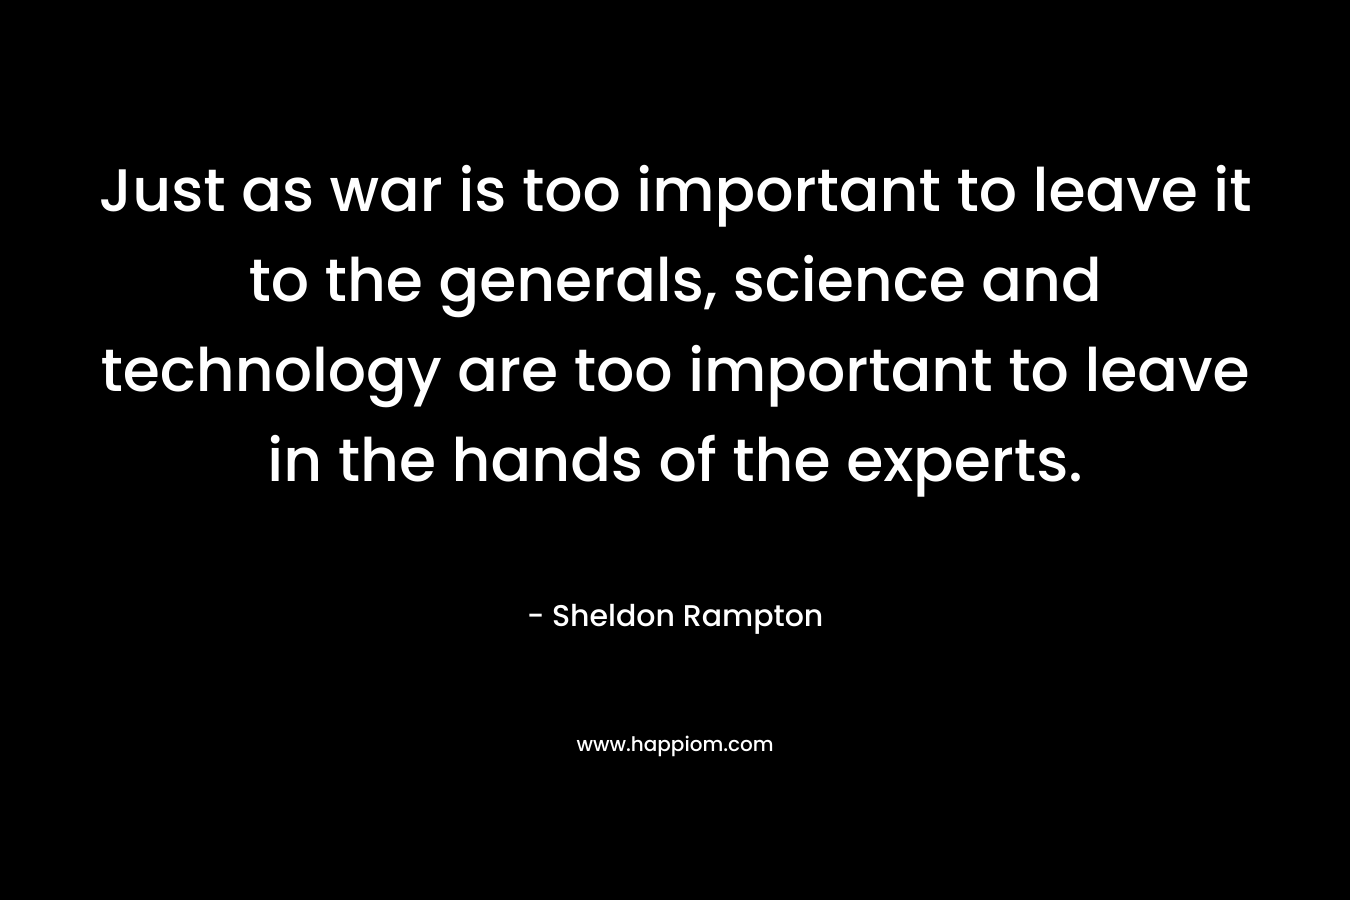 Just as war is too important to leave it to the generals, science and technology are too important to leave in the hands of the experts.